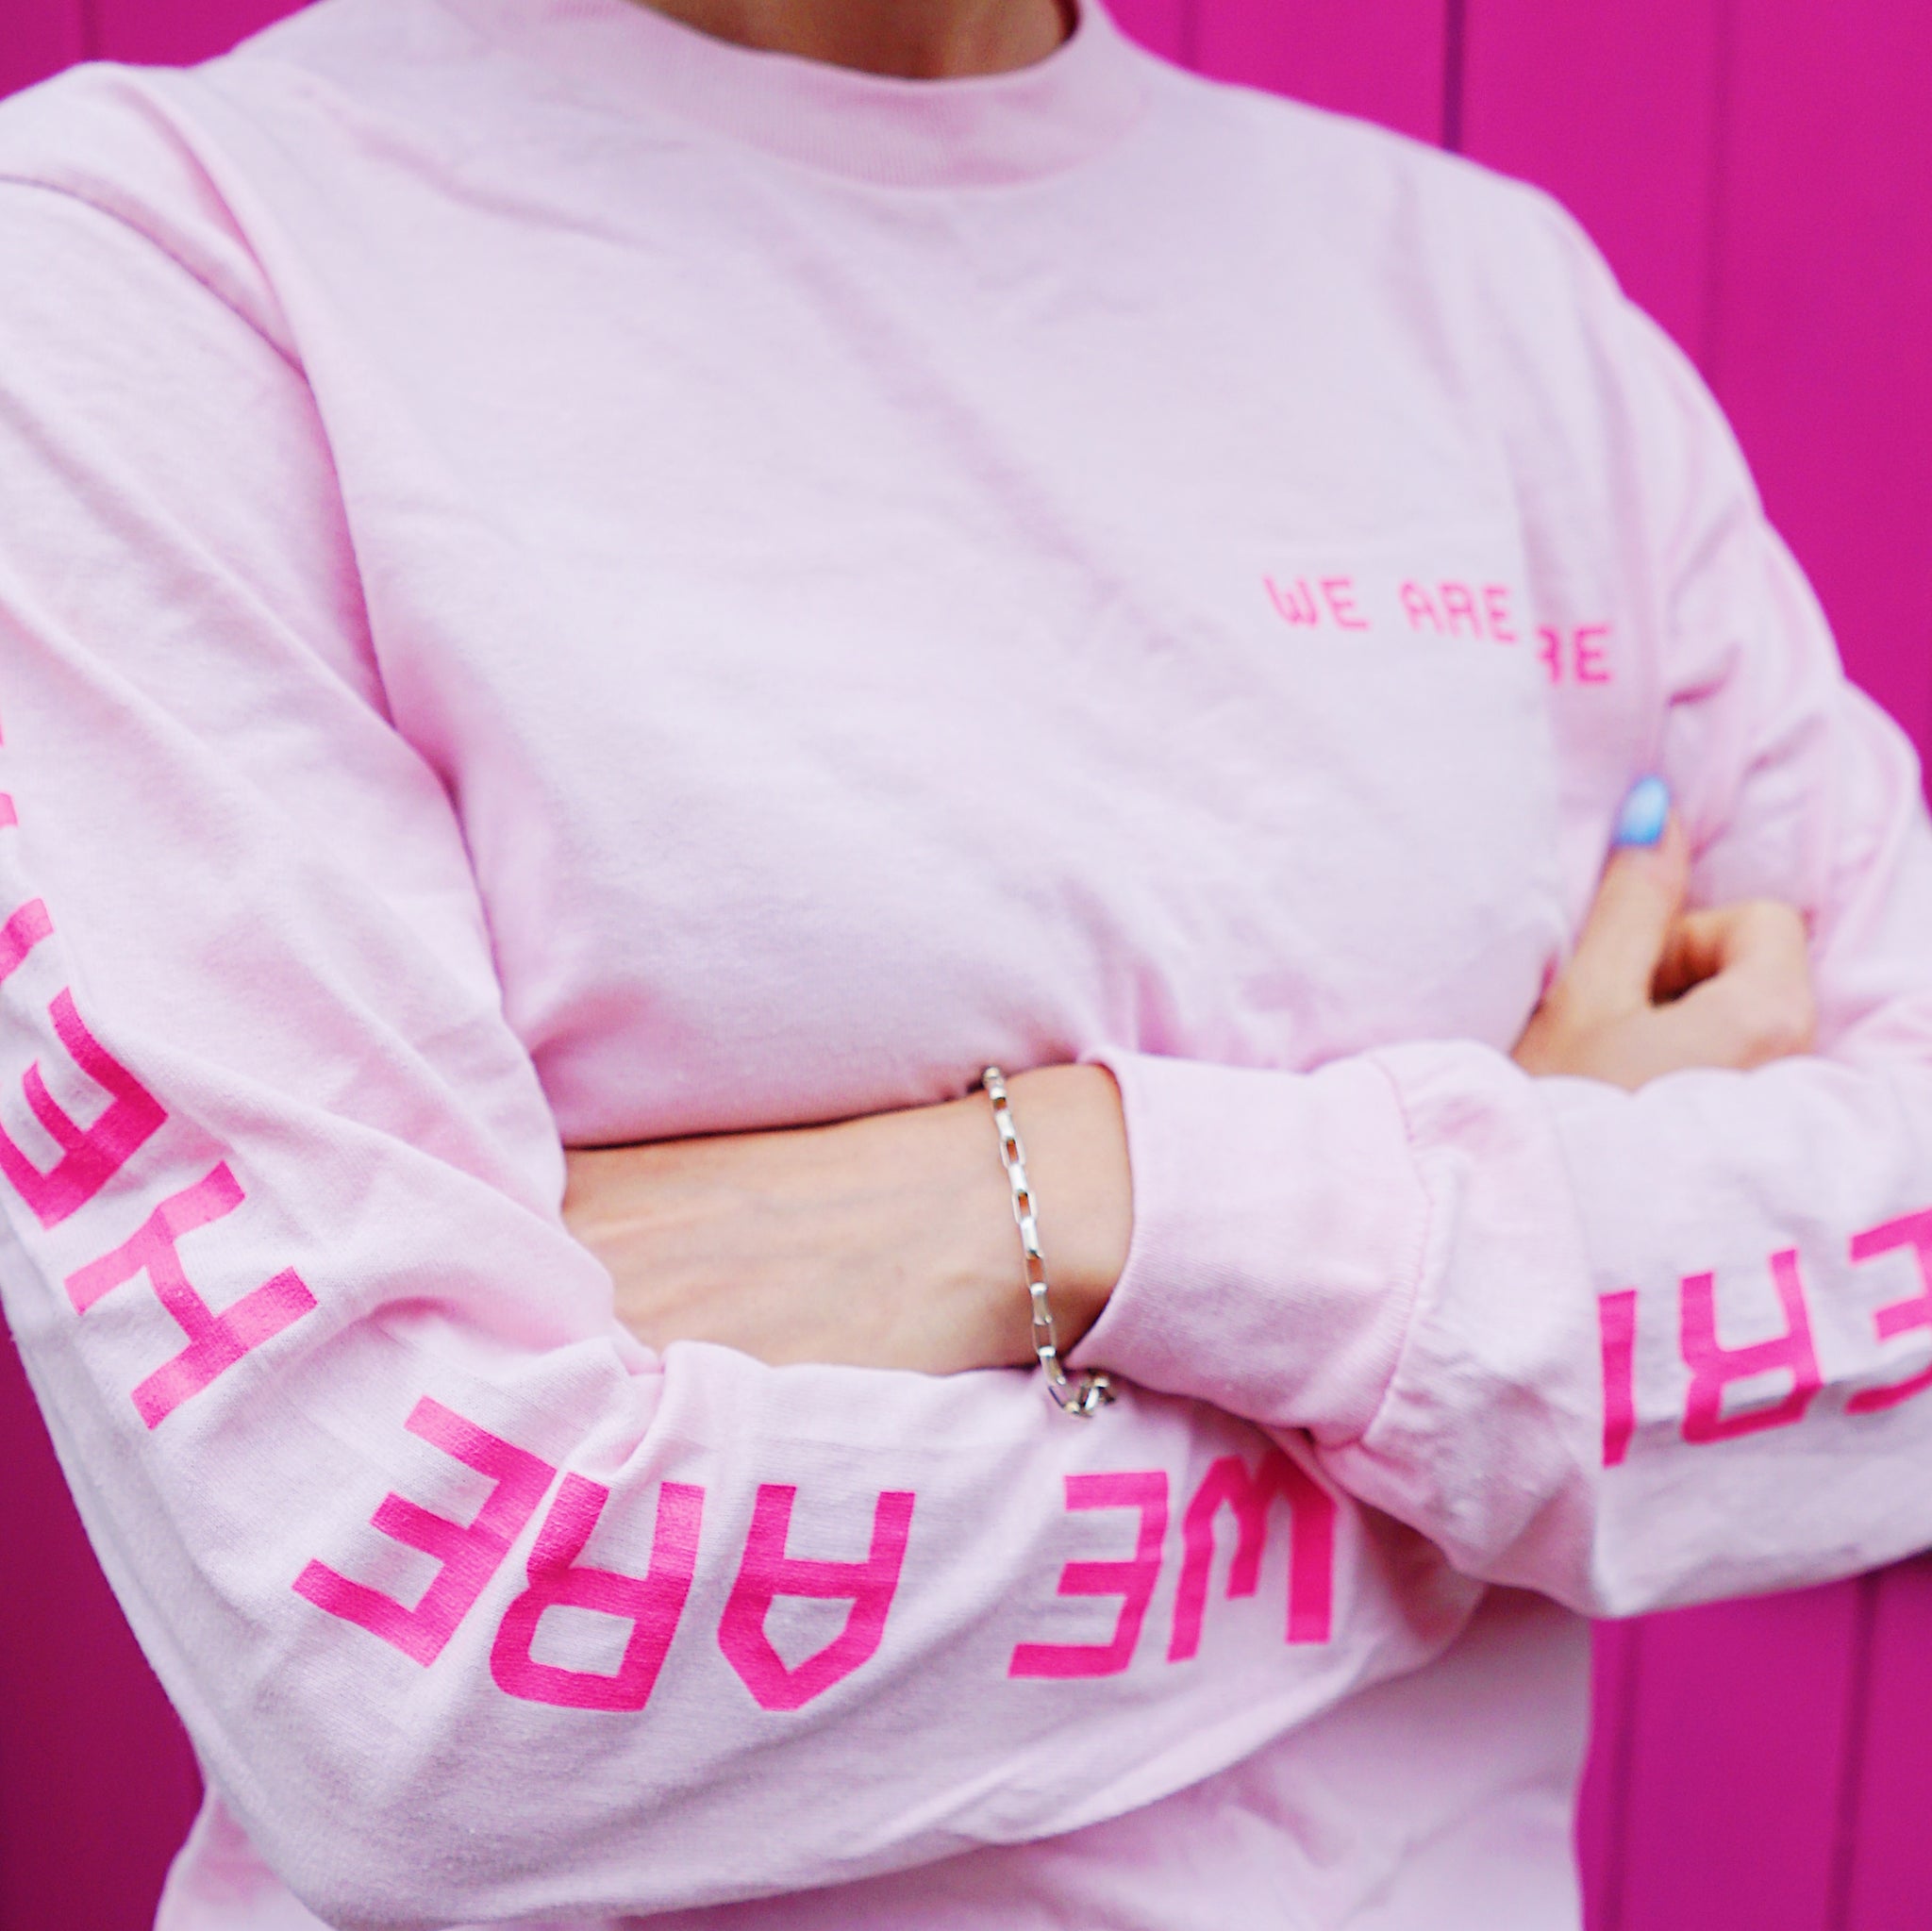 We Are Here - Neon Long Sleeve T-Shirt